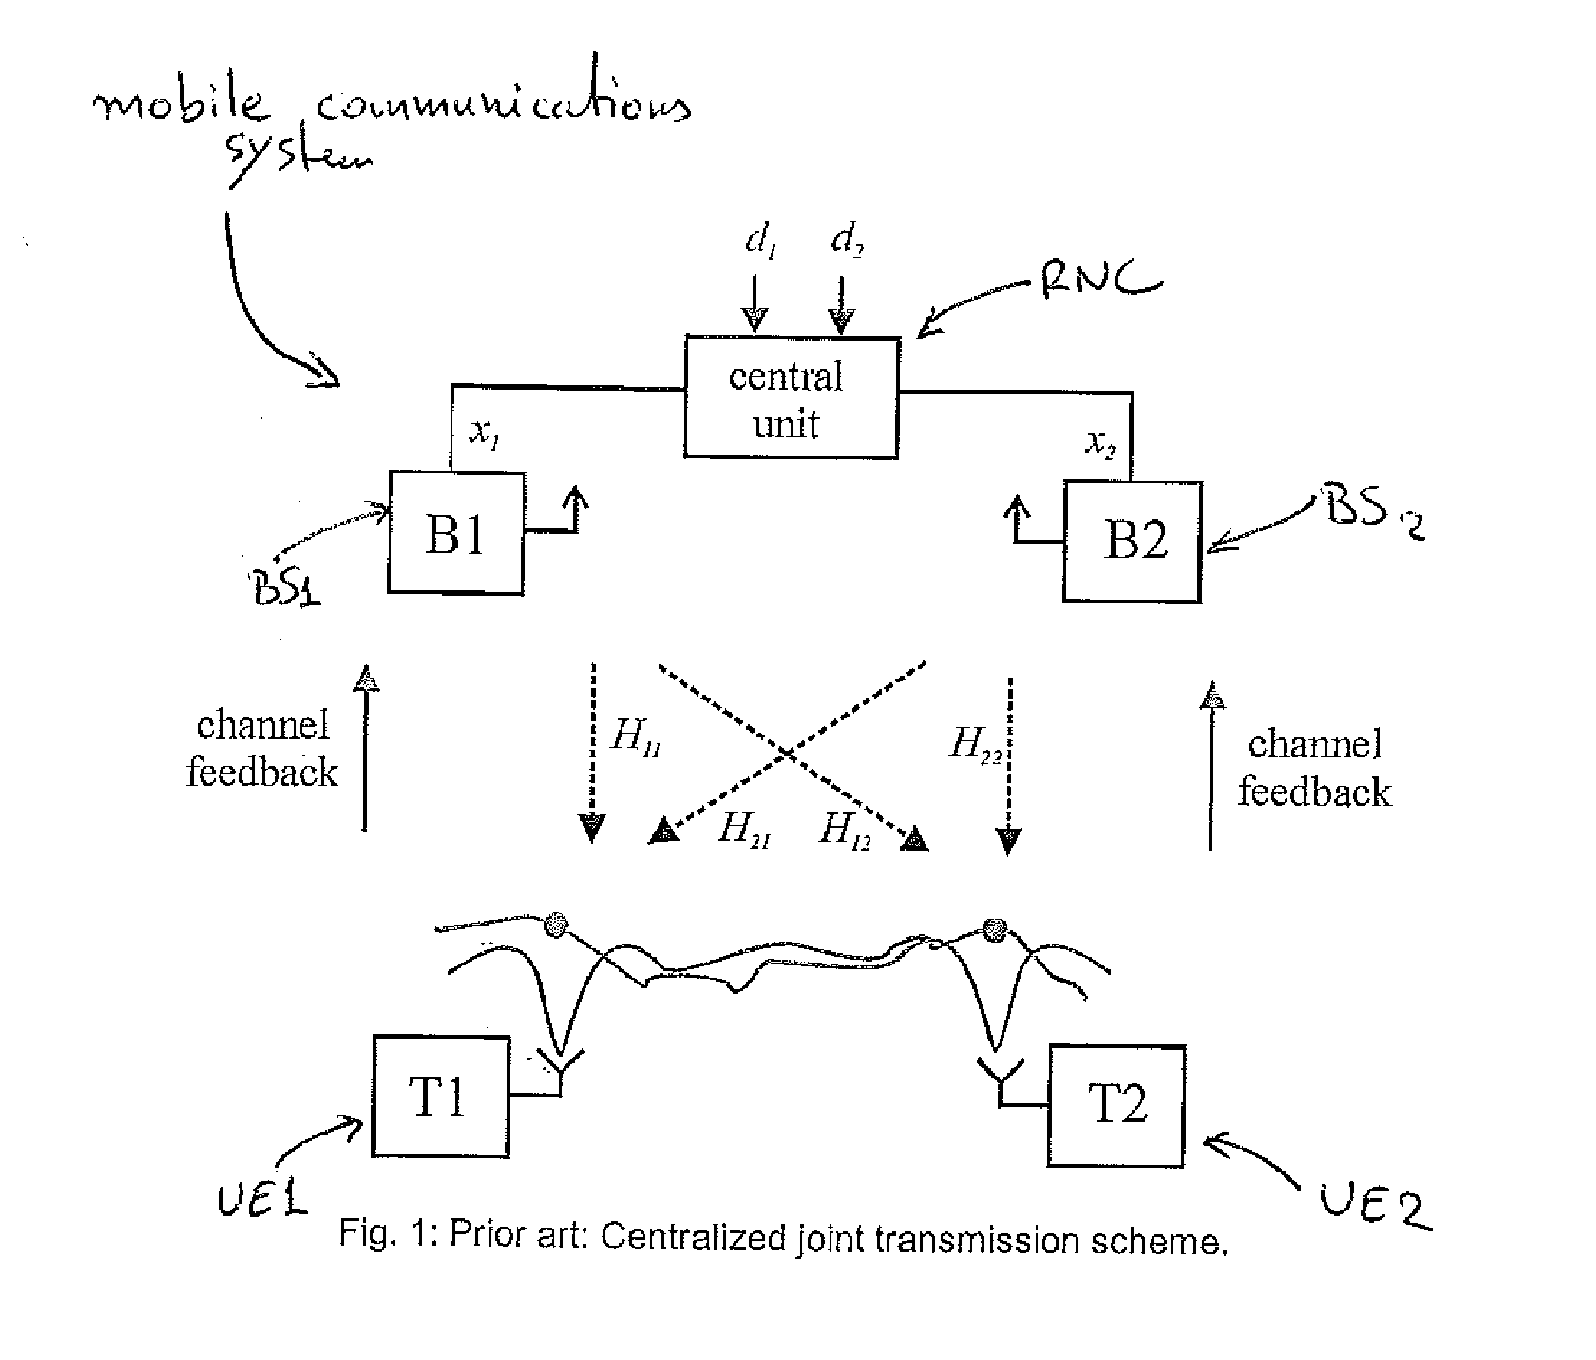 Method for Network Co-ordination in a Mobile Communications System and Apparatus Thereof